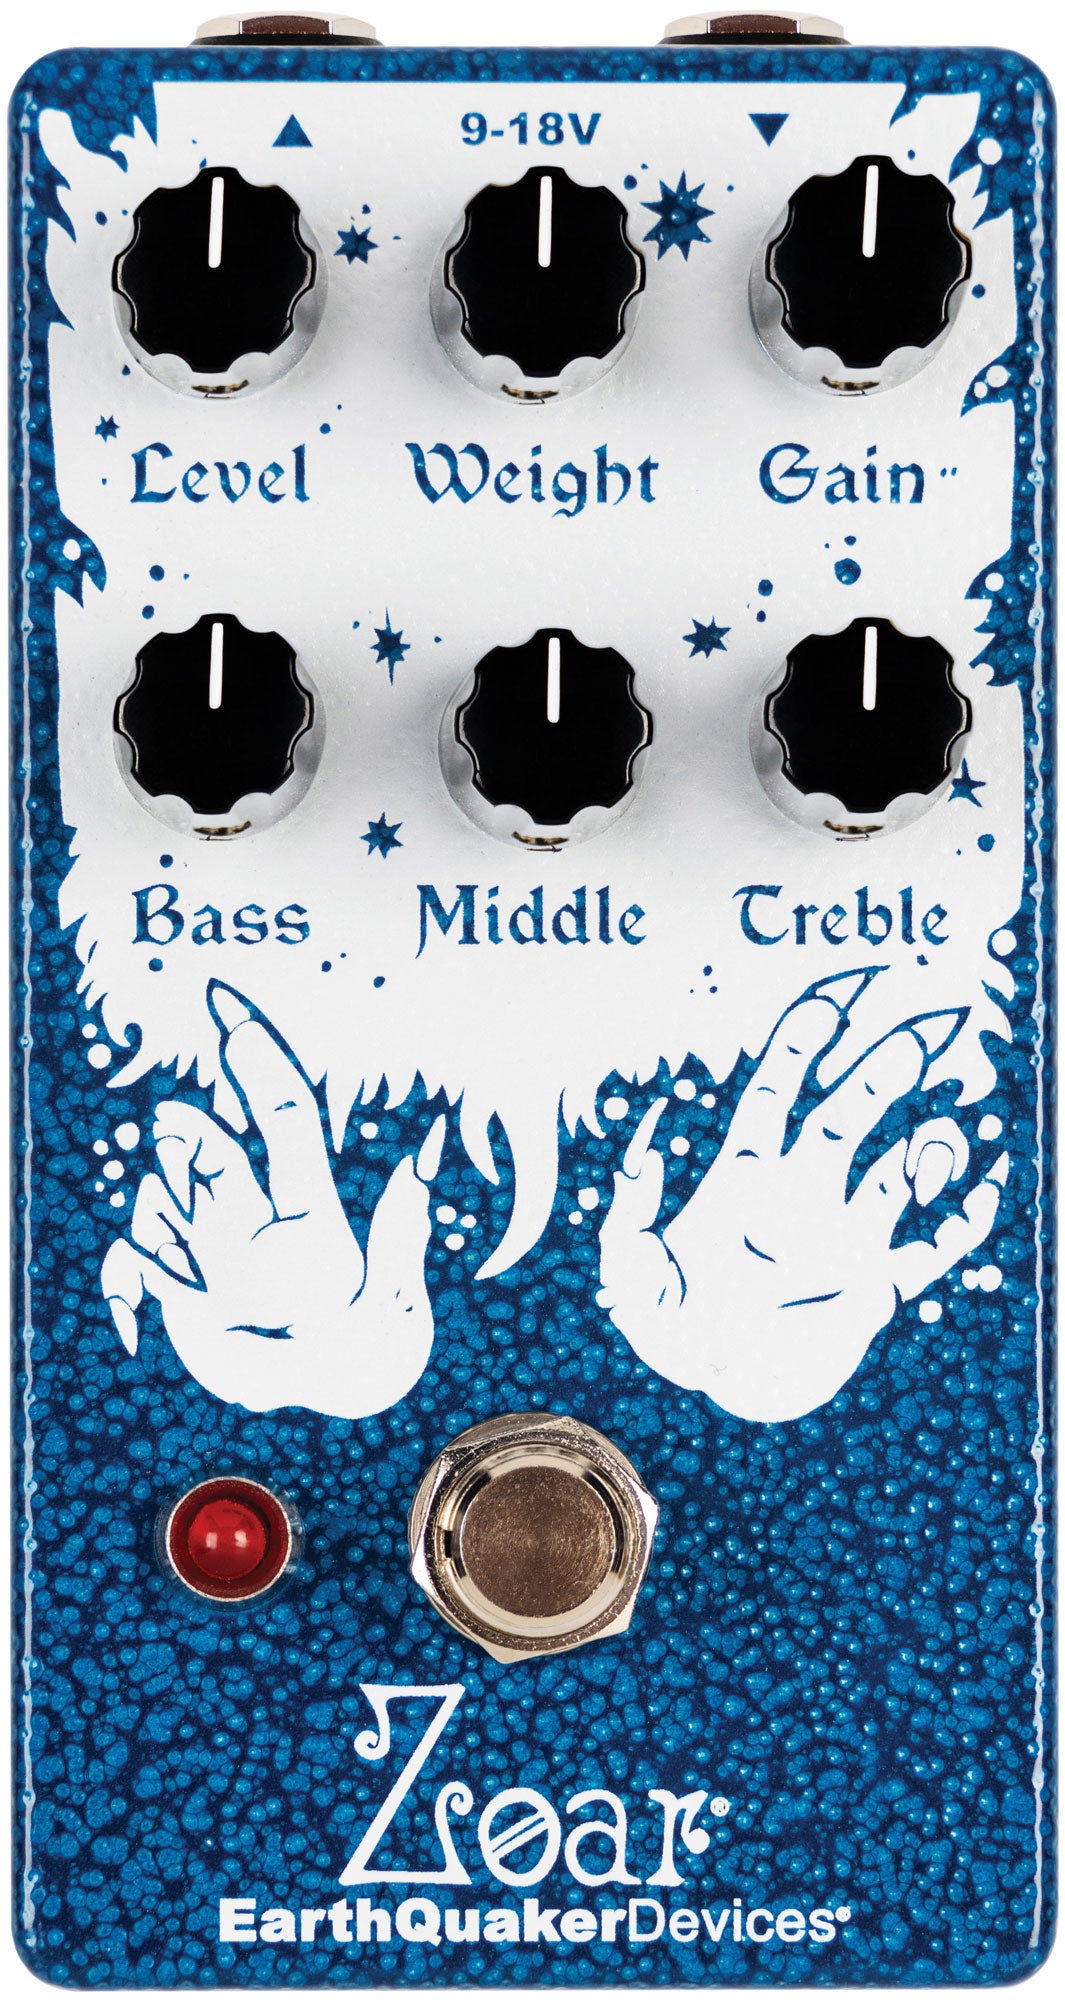 Top down of Earthquaker Devices Zoar Dynamic Audio Grinder.